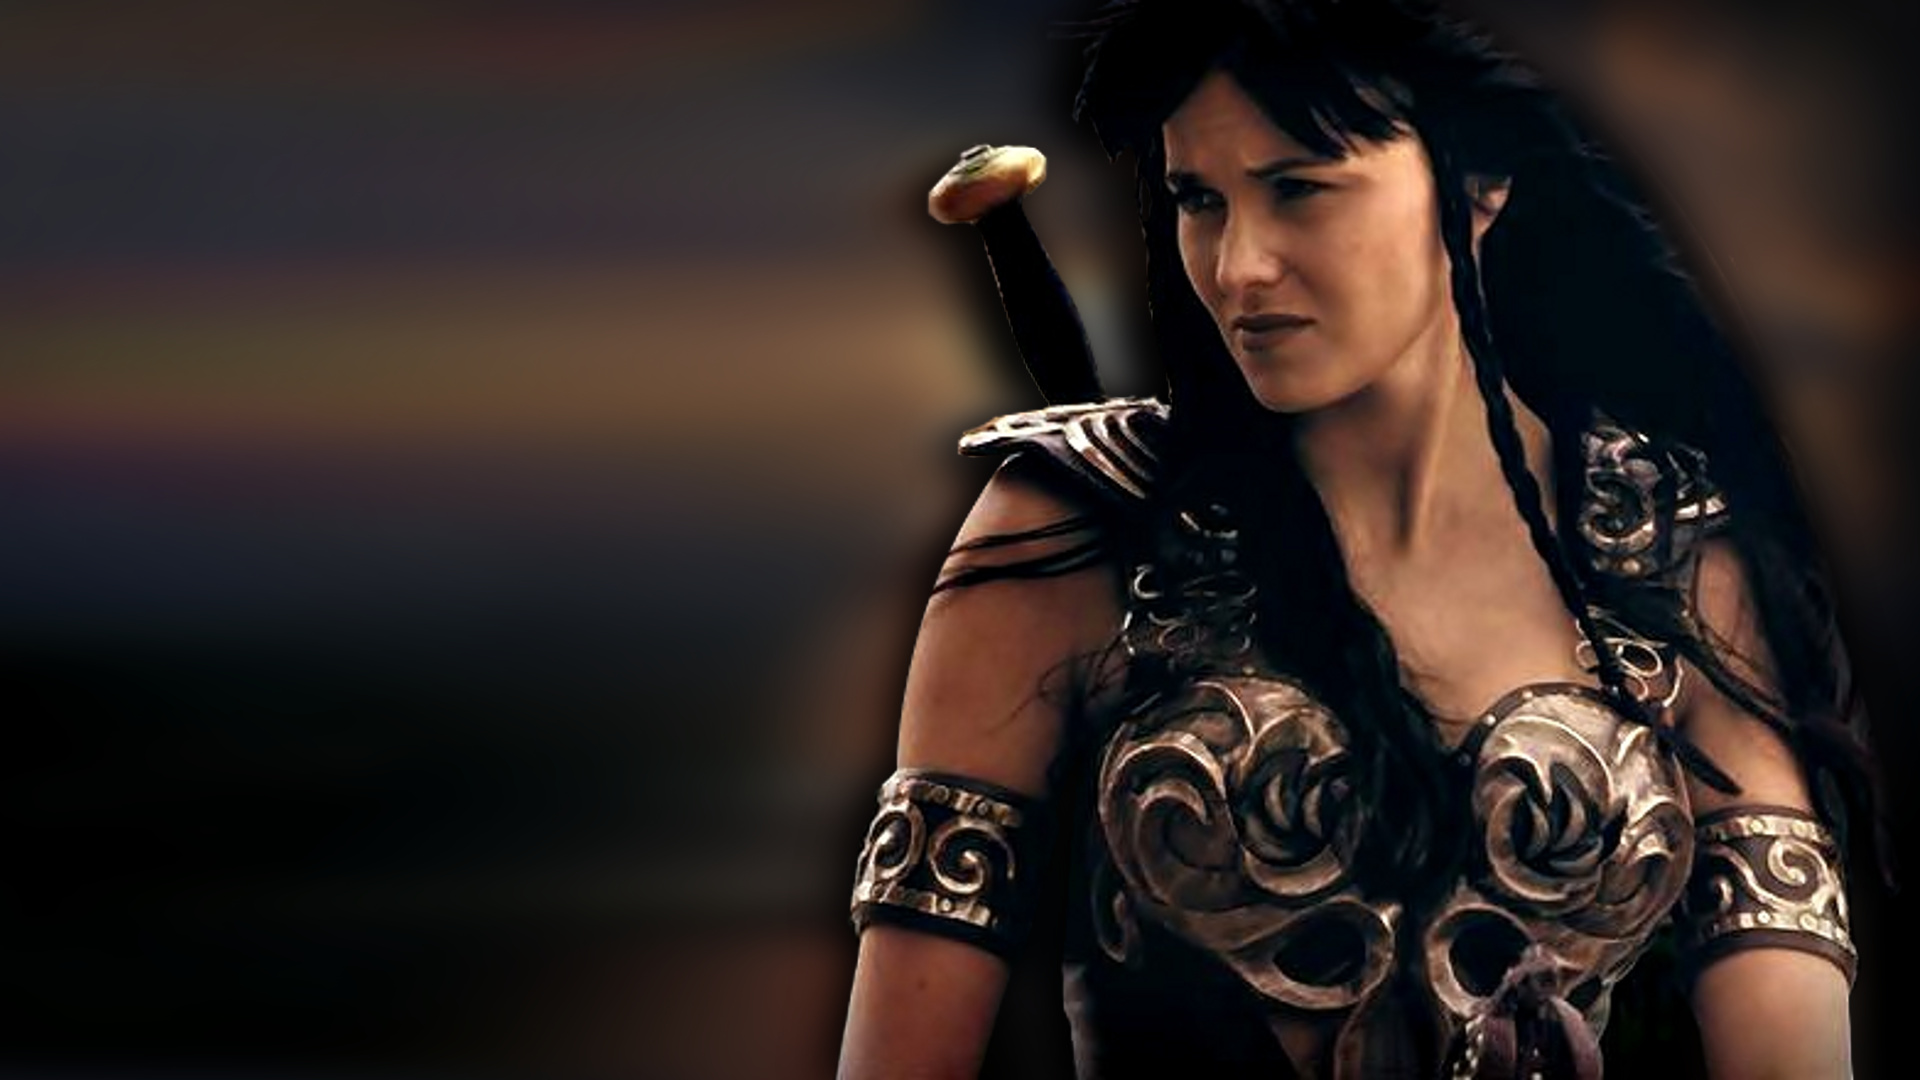 Xena: Warrior Princess (TV Series): A fictional character from Robert Tapert's franchise of the same name. 1920x1080 Full HD Background.